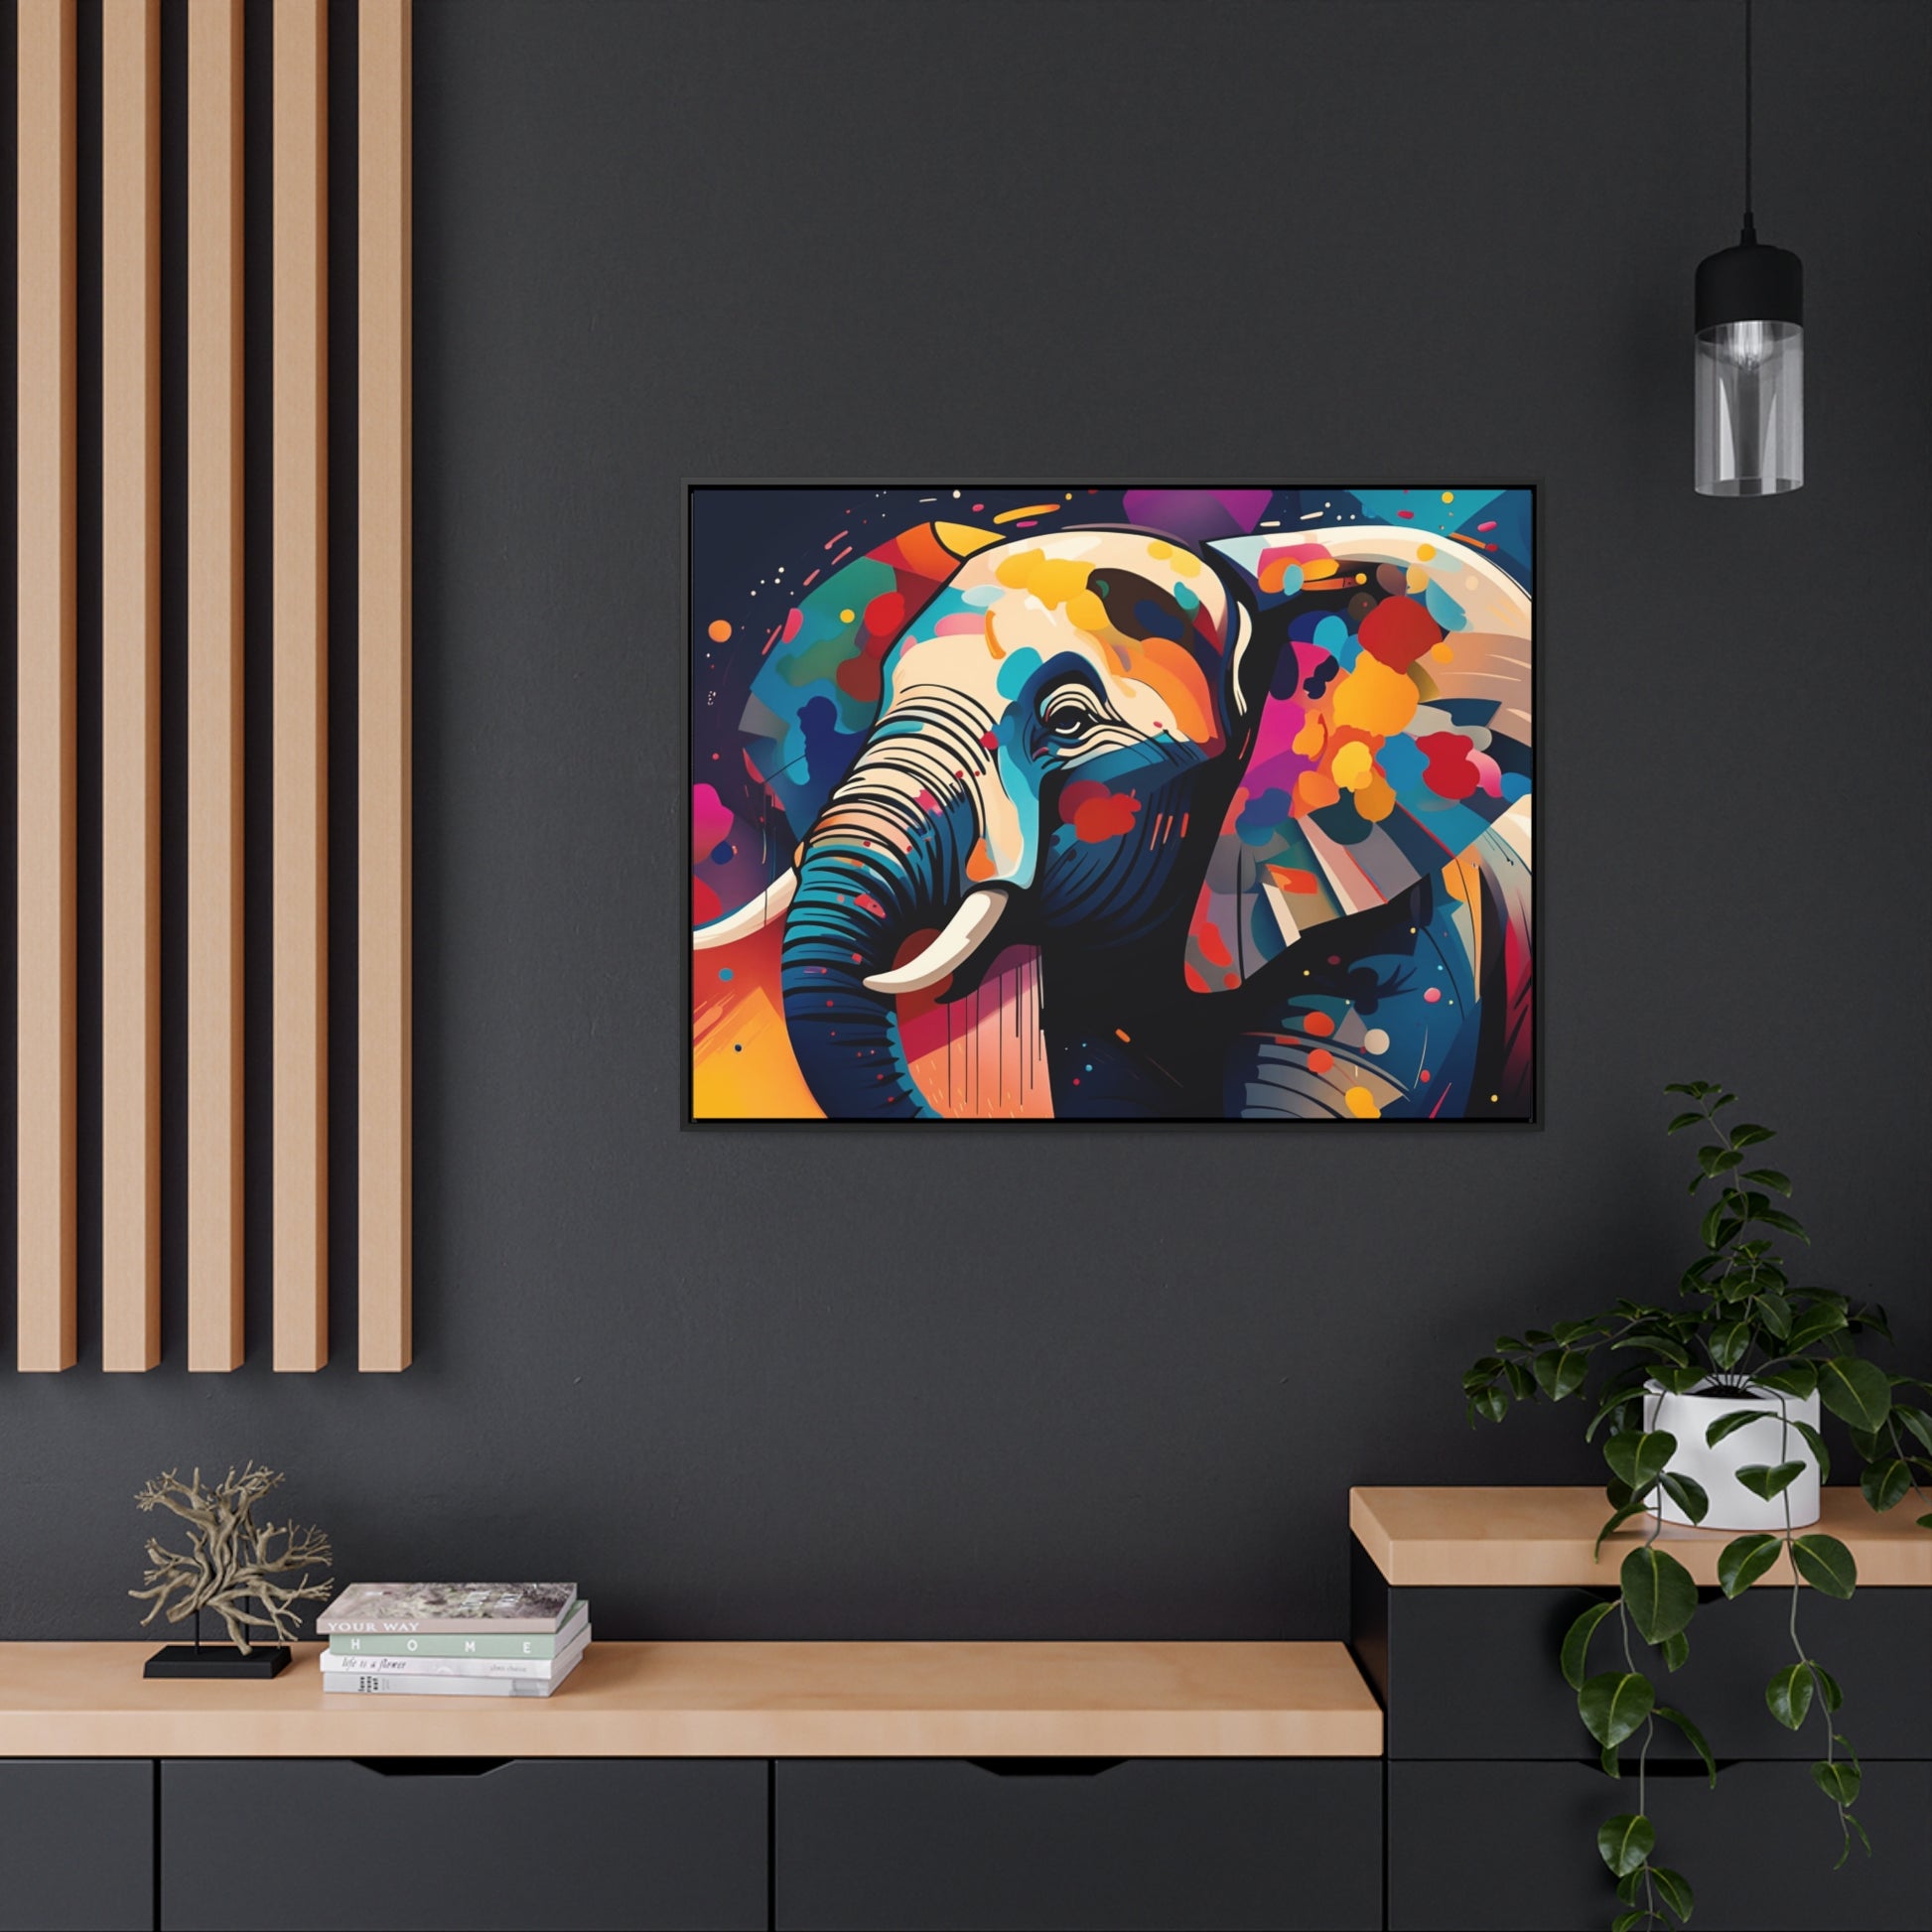 Multicolor Elephant Head Print on Canvas in a Floating Frame 40x30 hung